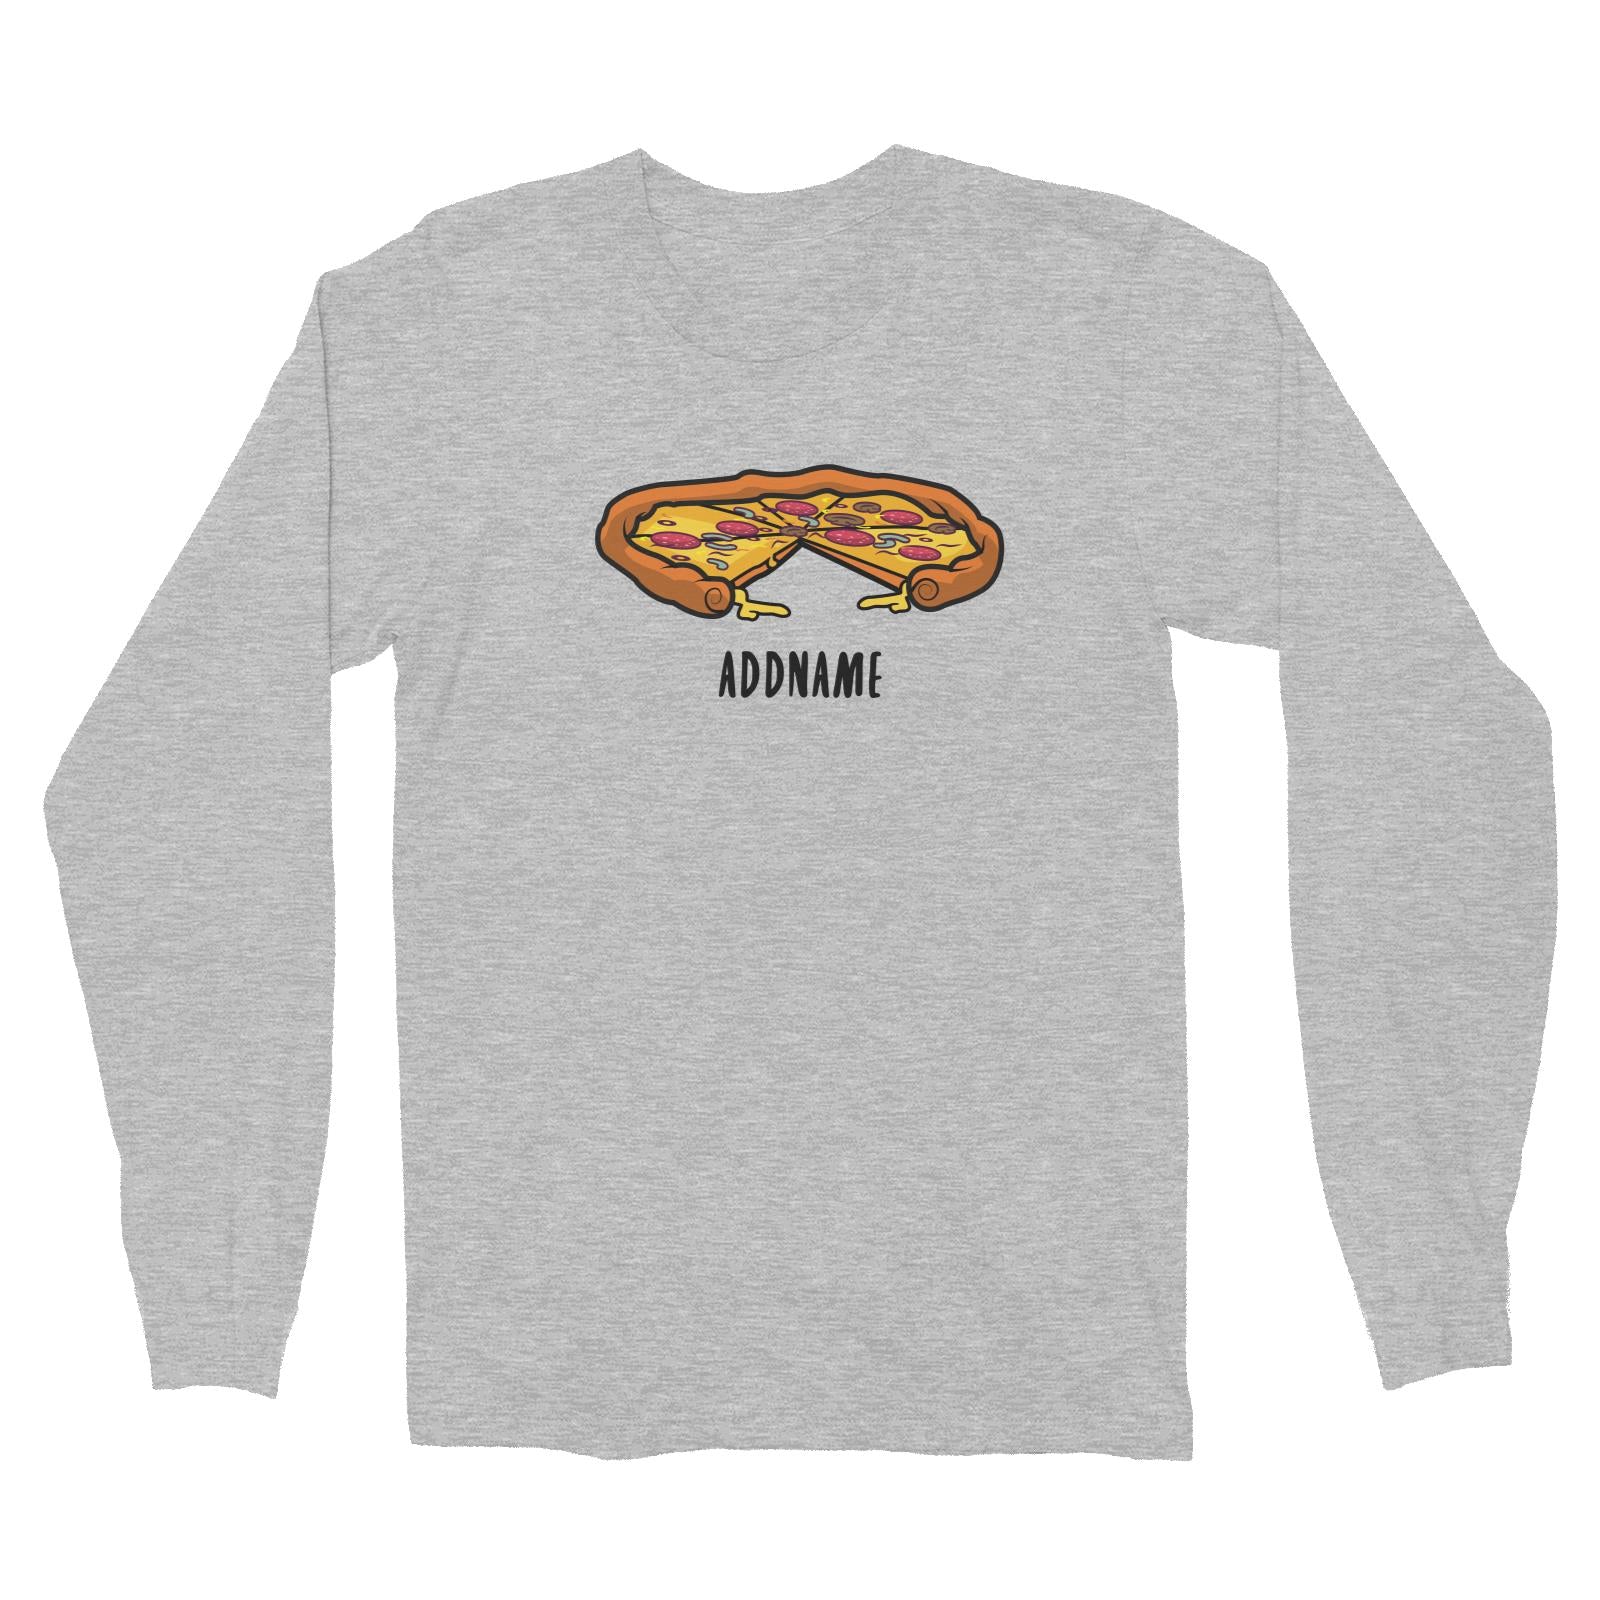 Fast Food Whole Pizza with A Slice Taken Out Addname Long Sleeve Unisex T-Shirt  Matching Family Comic Cartoon Personalizable Designs